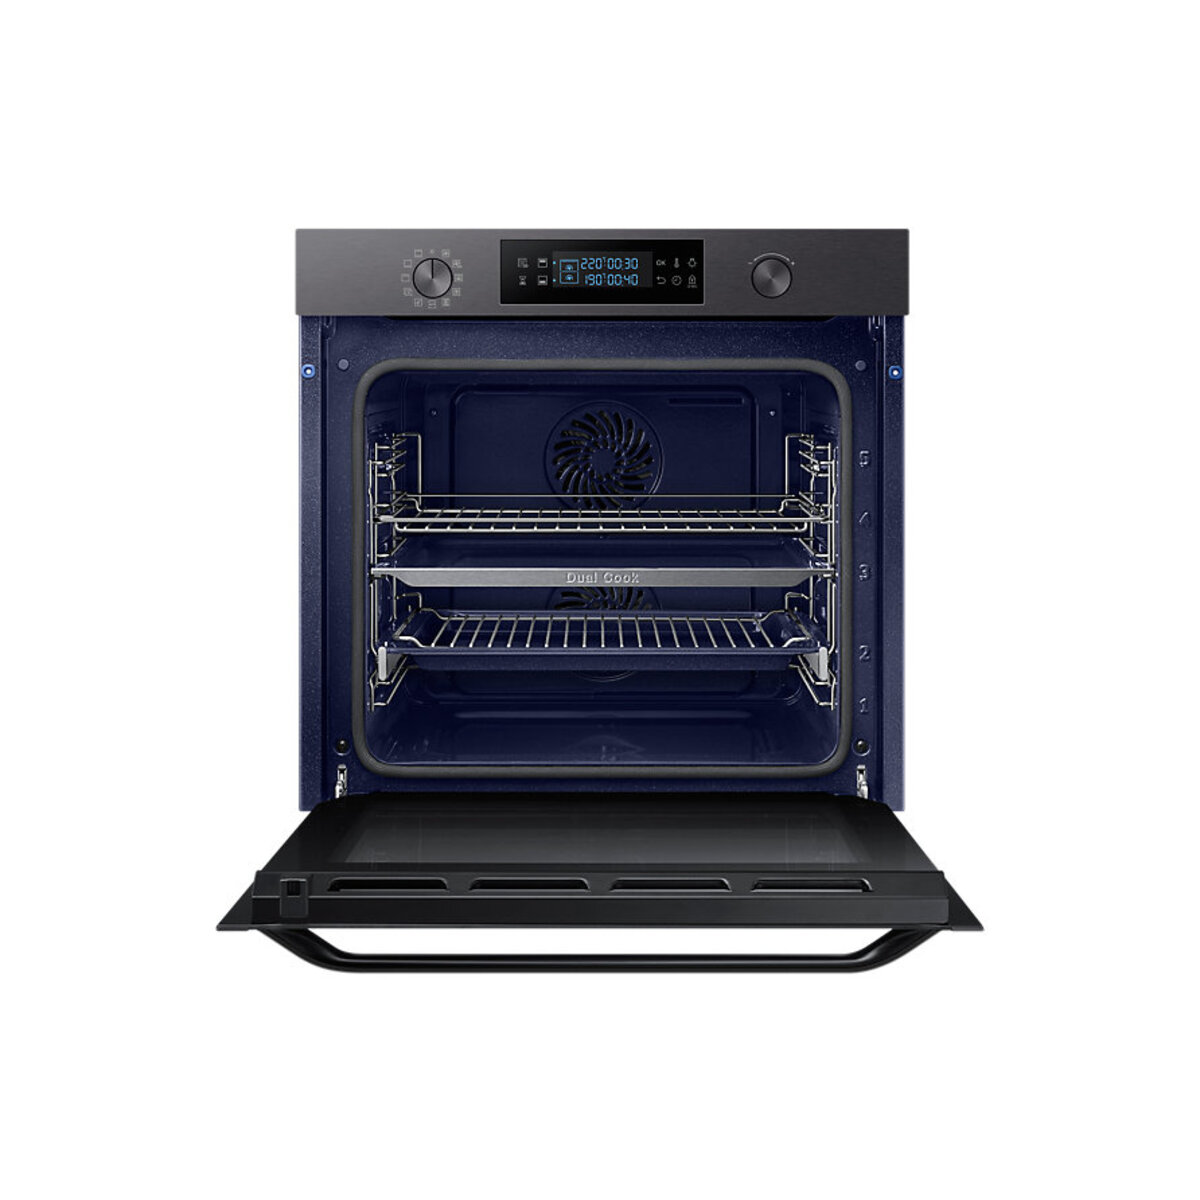 Samsung NV75K5571RM Electric Oven with Dual Cook, 75 Litre Capacity in Blk